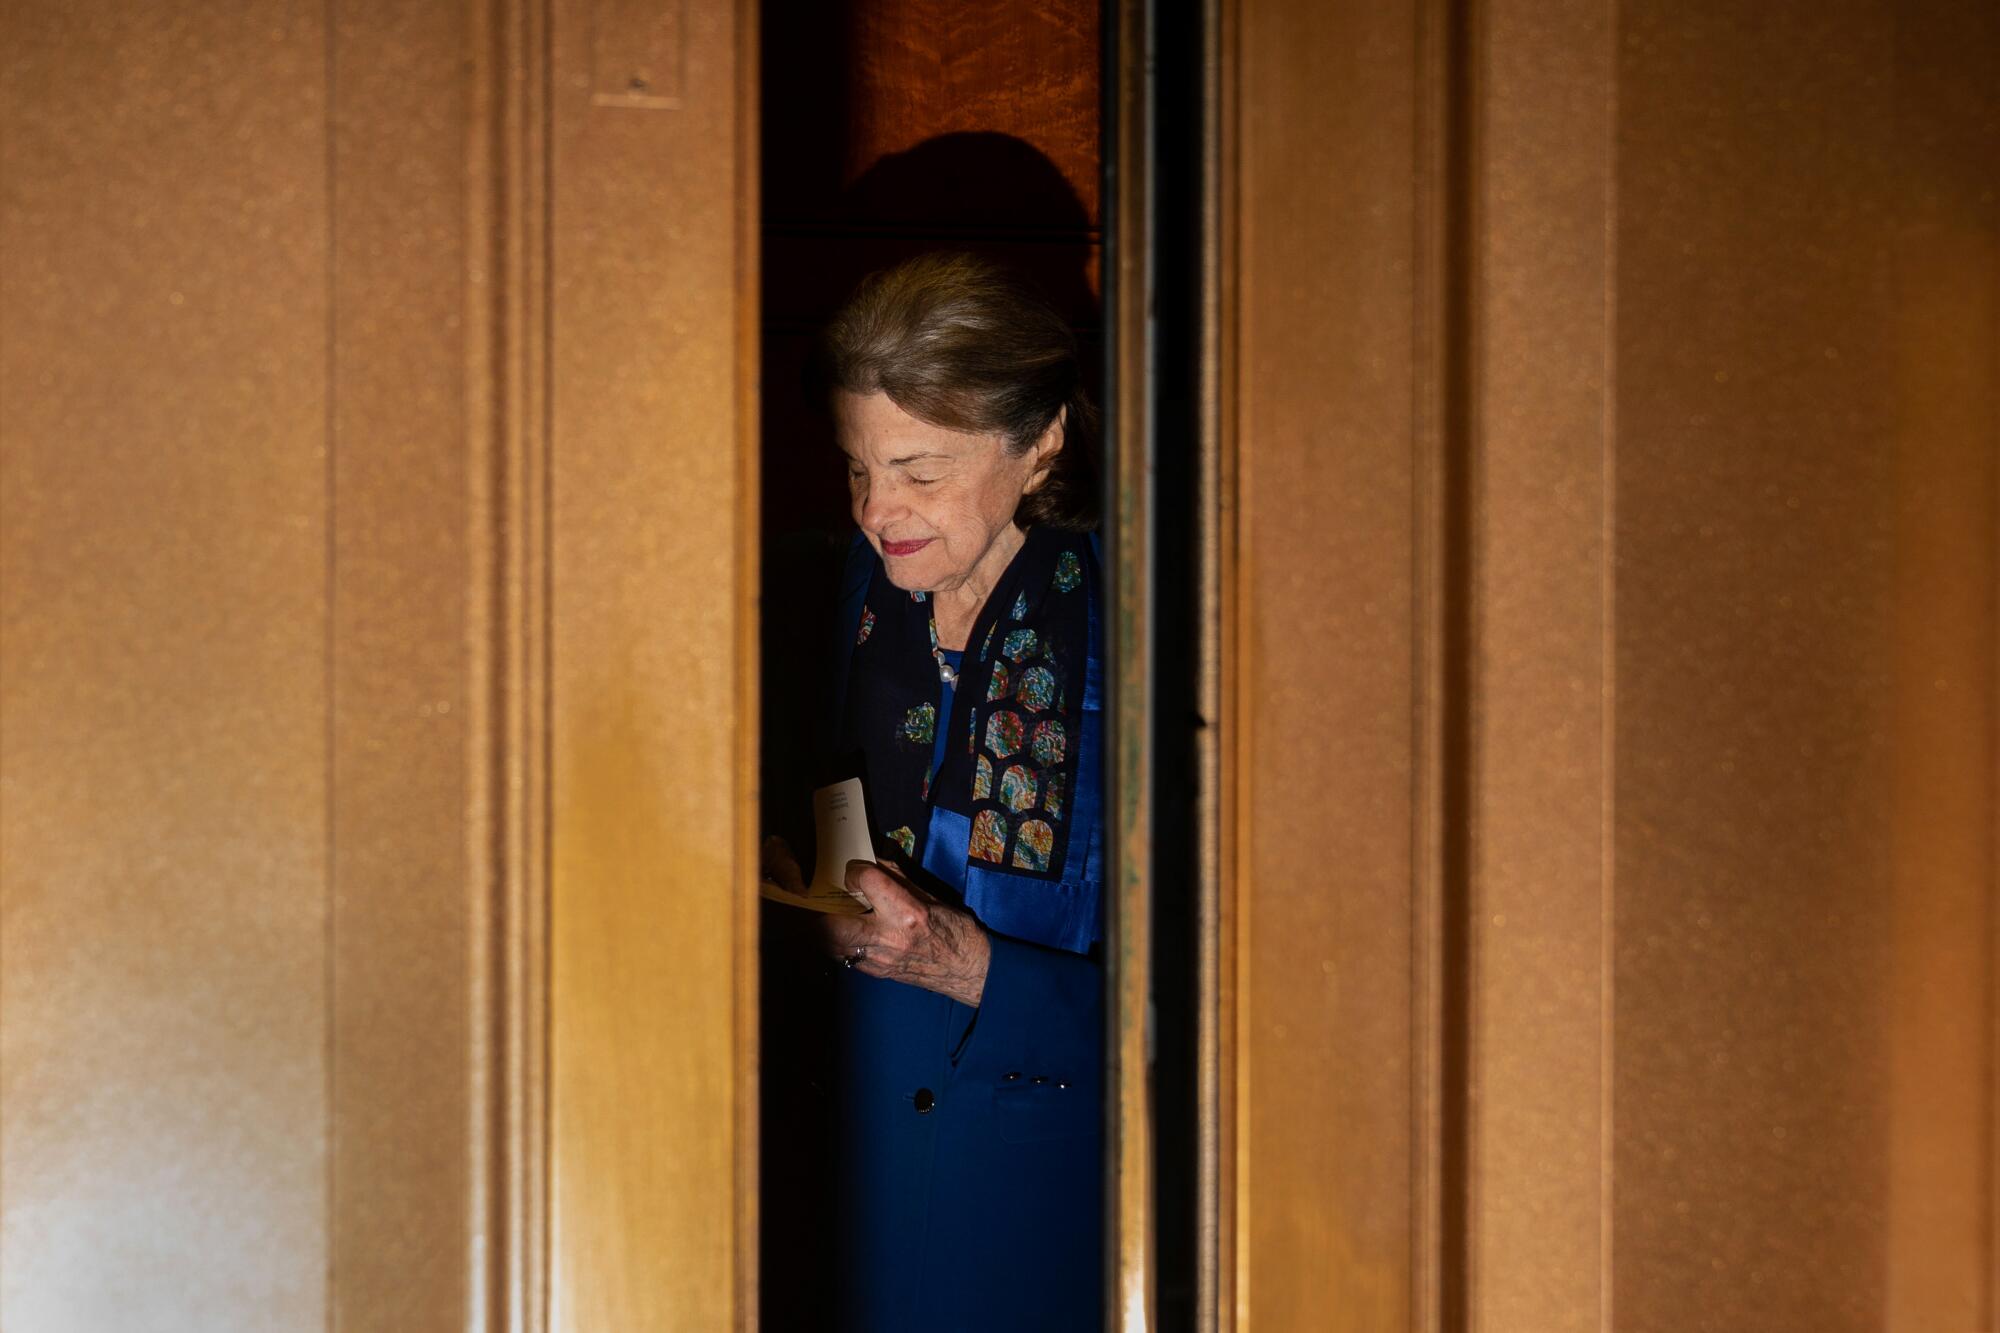 Sen. Dianne Feinstein is seen through a flash-lit door opening, slightly smiling with her eyes closed.